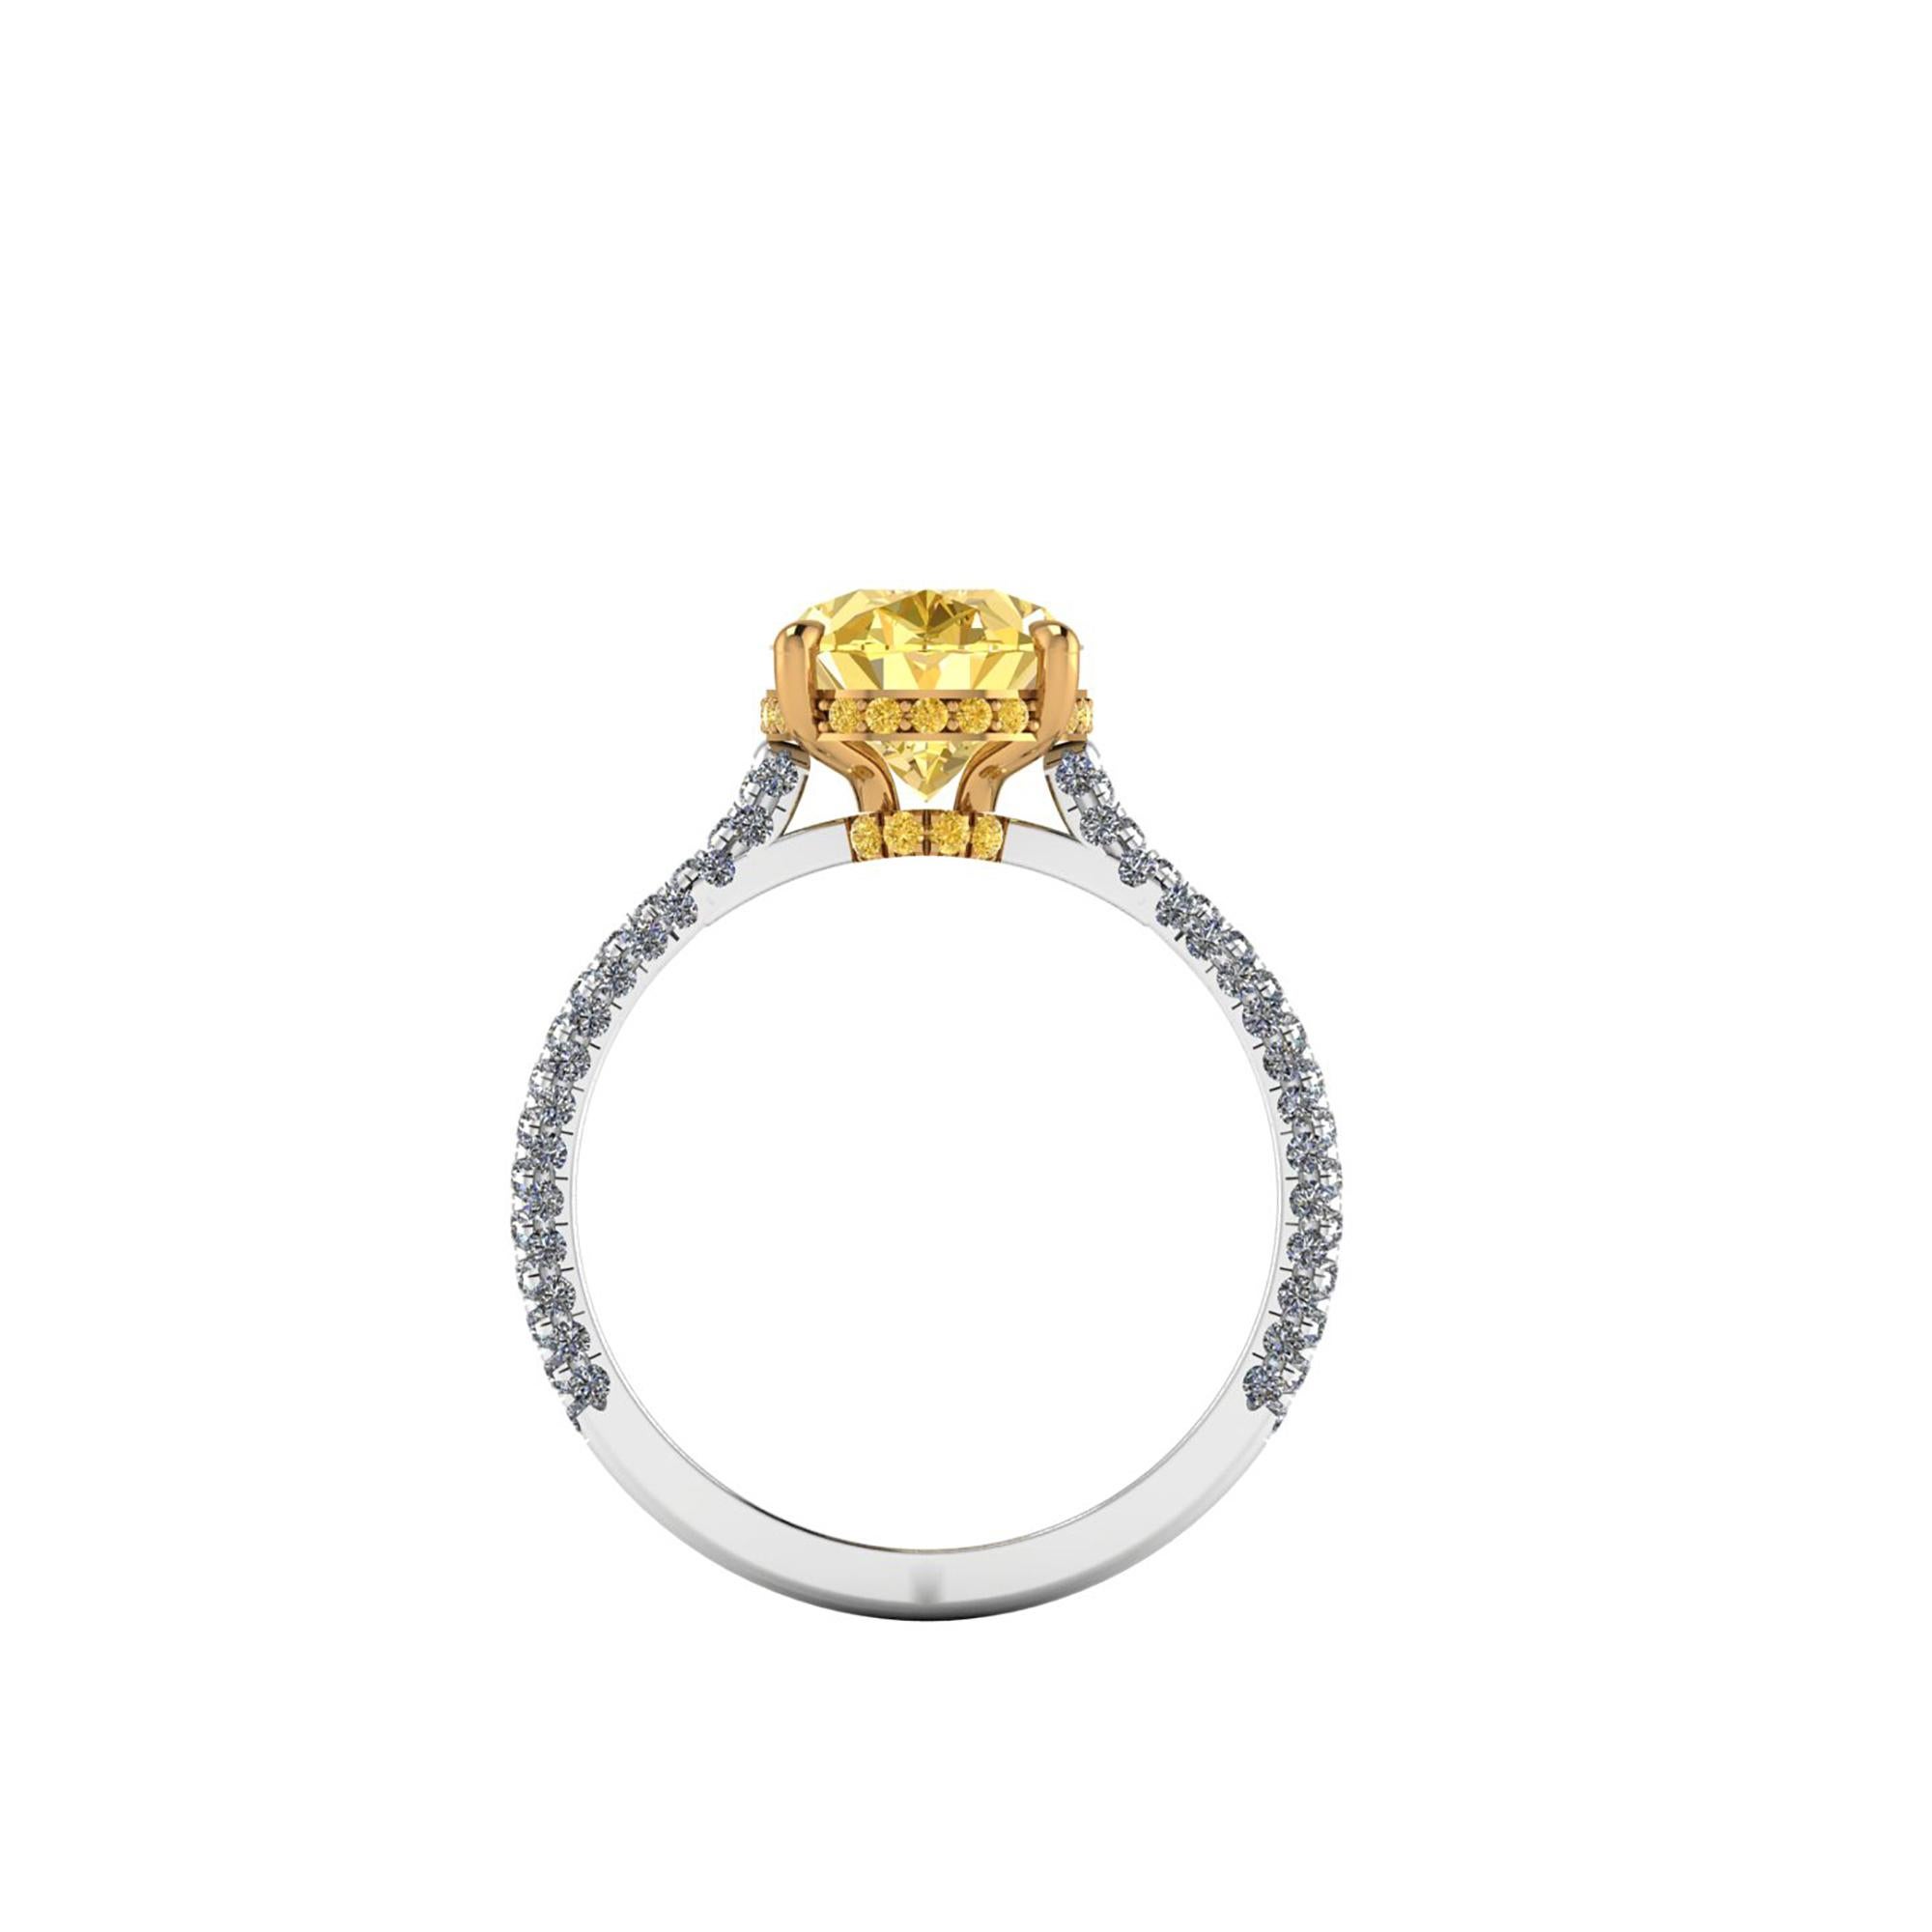 A very rare diamond in color and beauty, GIA Certified 3.02 carat Oval Vivid Intense Yellow diamond with No Fluorescence, a rare and valuable diamond, set on a Platinum 950 and 18k Yellow gold ring, designed and hand made in New York adorned by